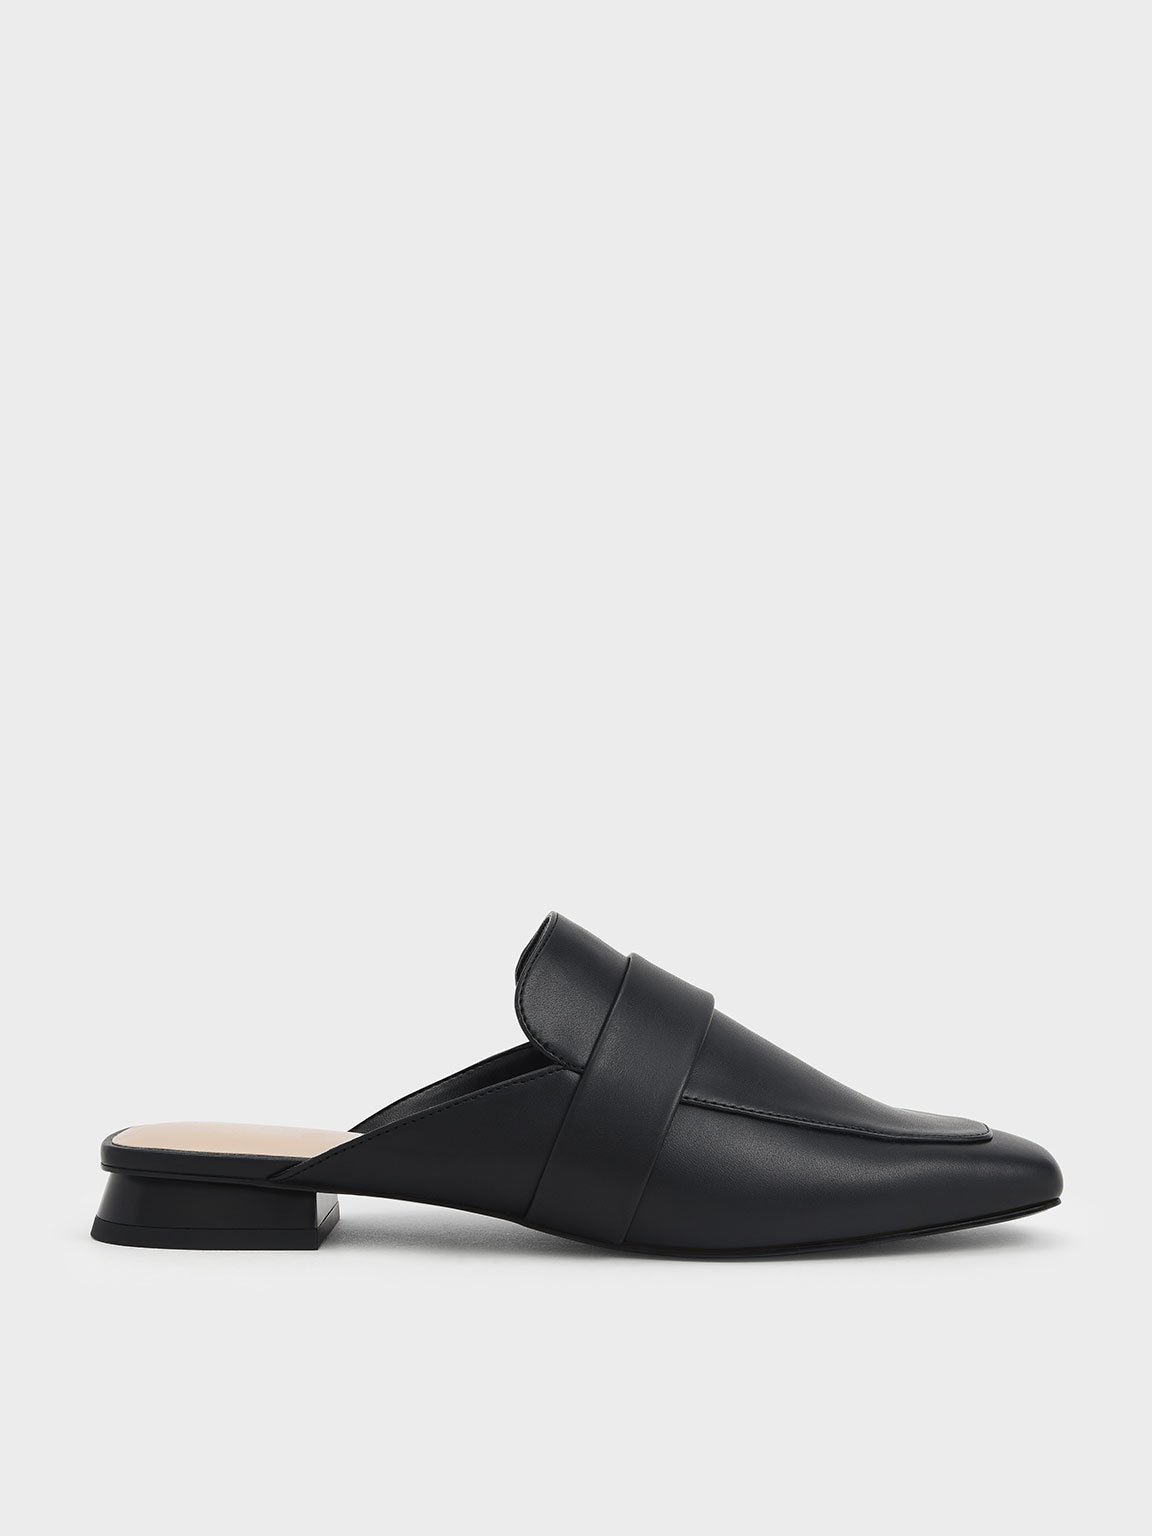 Black Penny Loafer Mules - CHARLES & KEITH KH